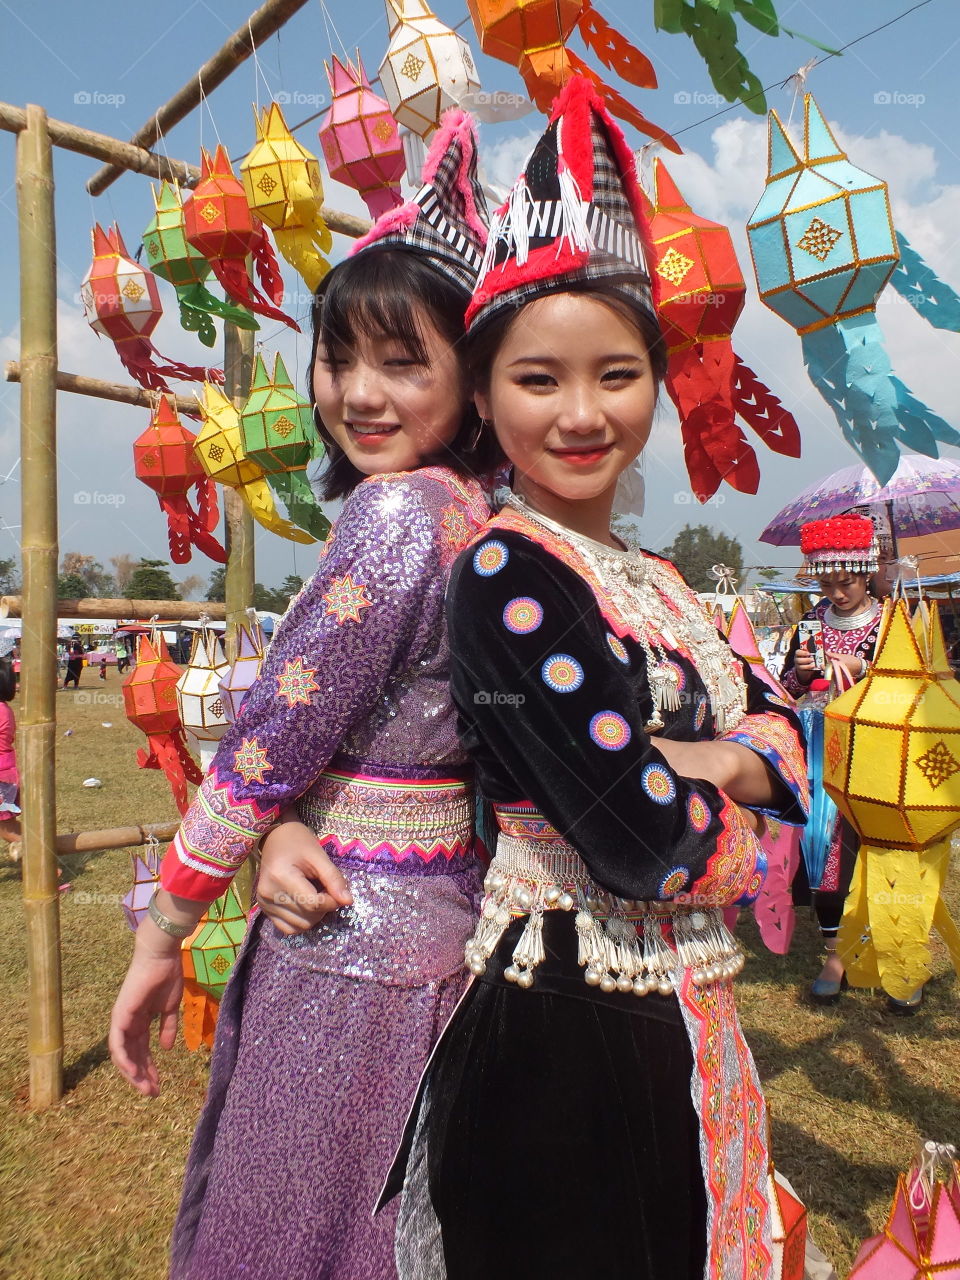 Dress of the Hmong people in the New Year festival.